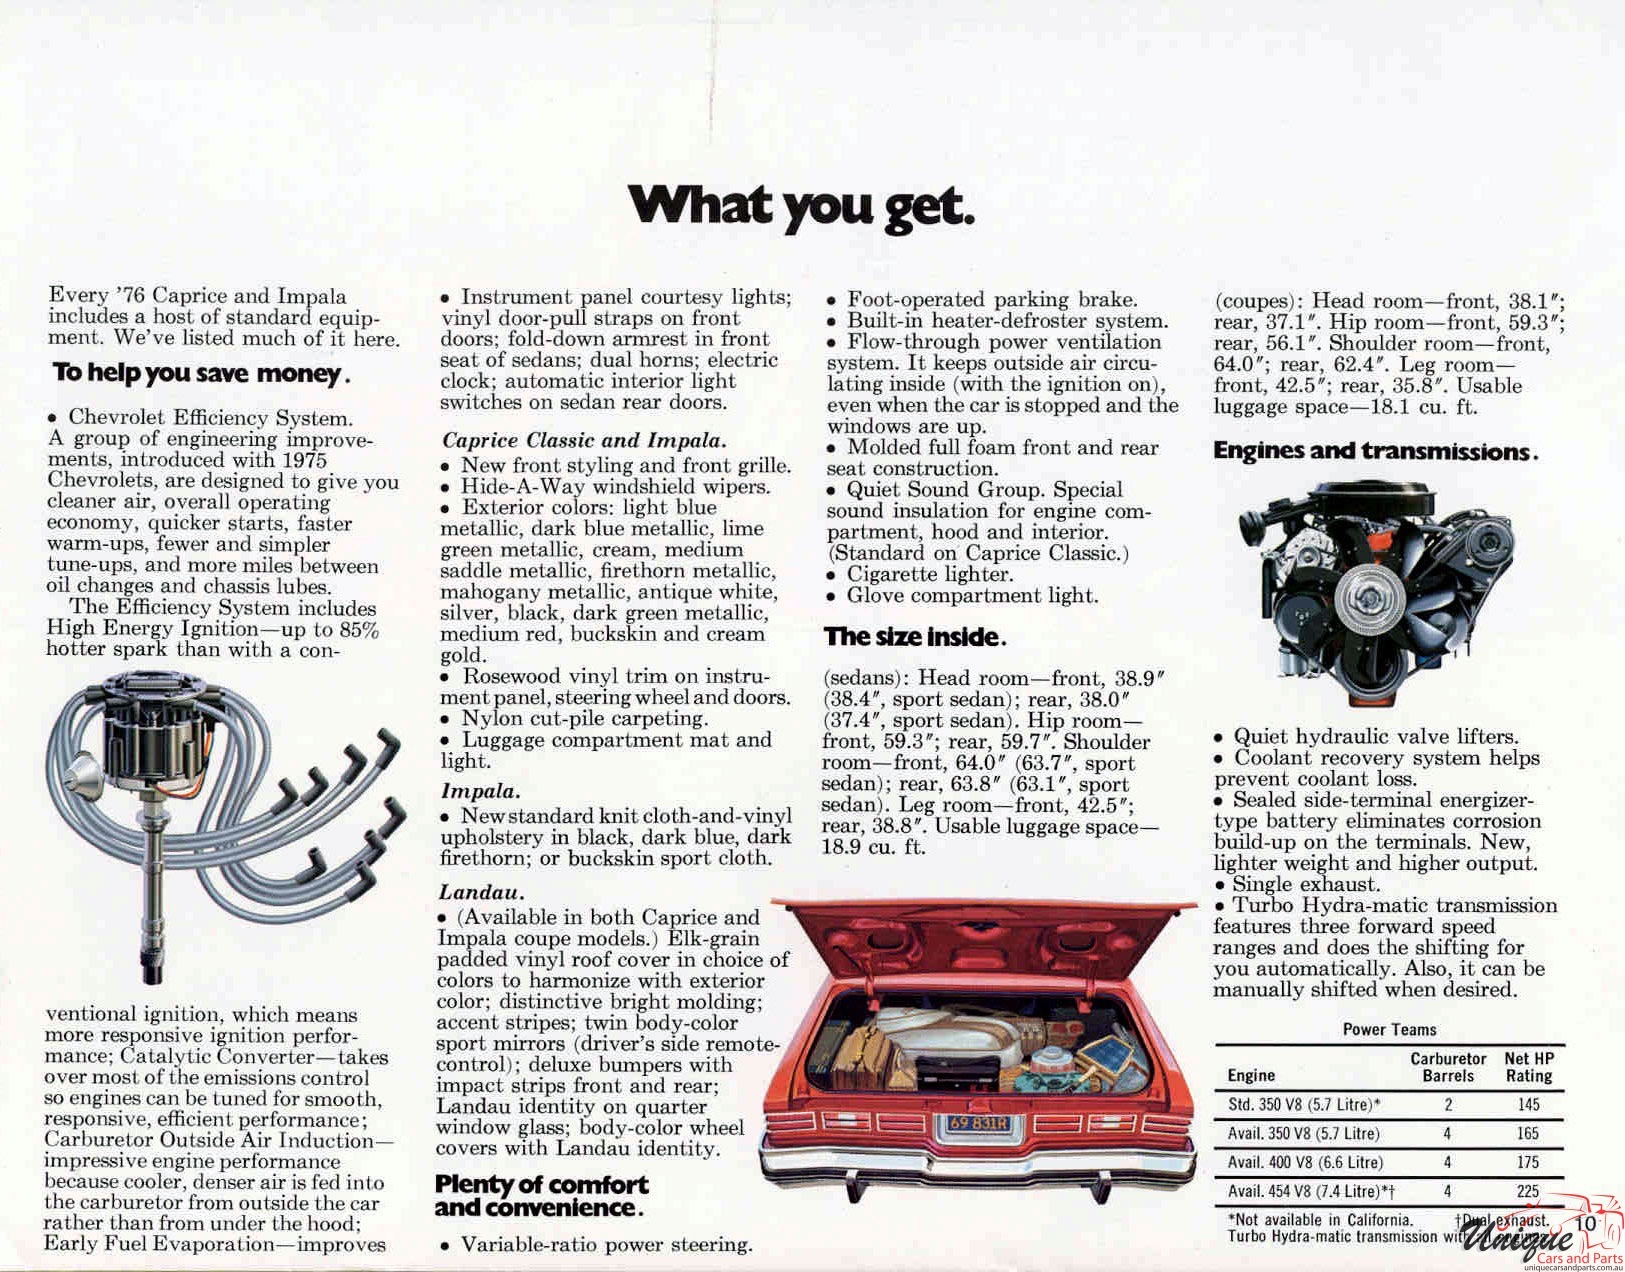 1976 Chevrolet Brochure Page 2